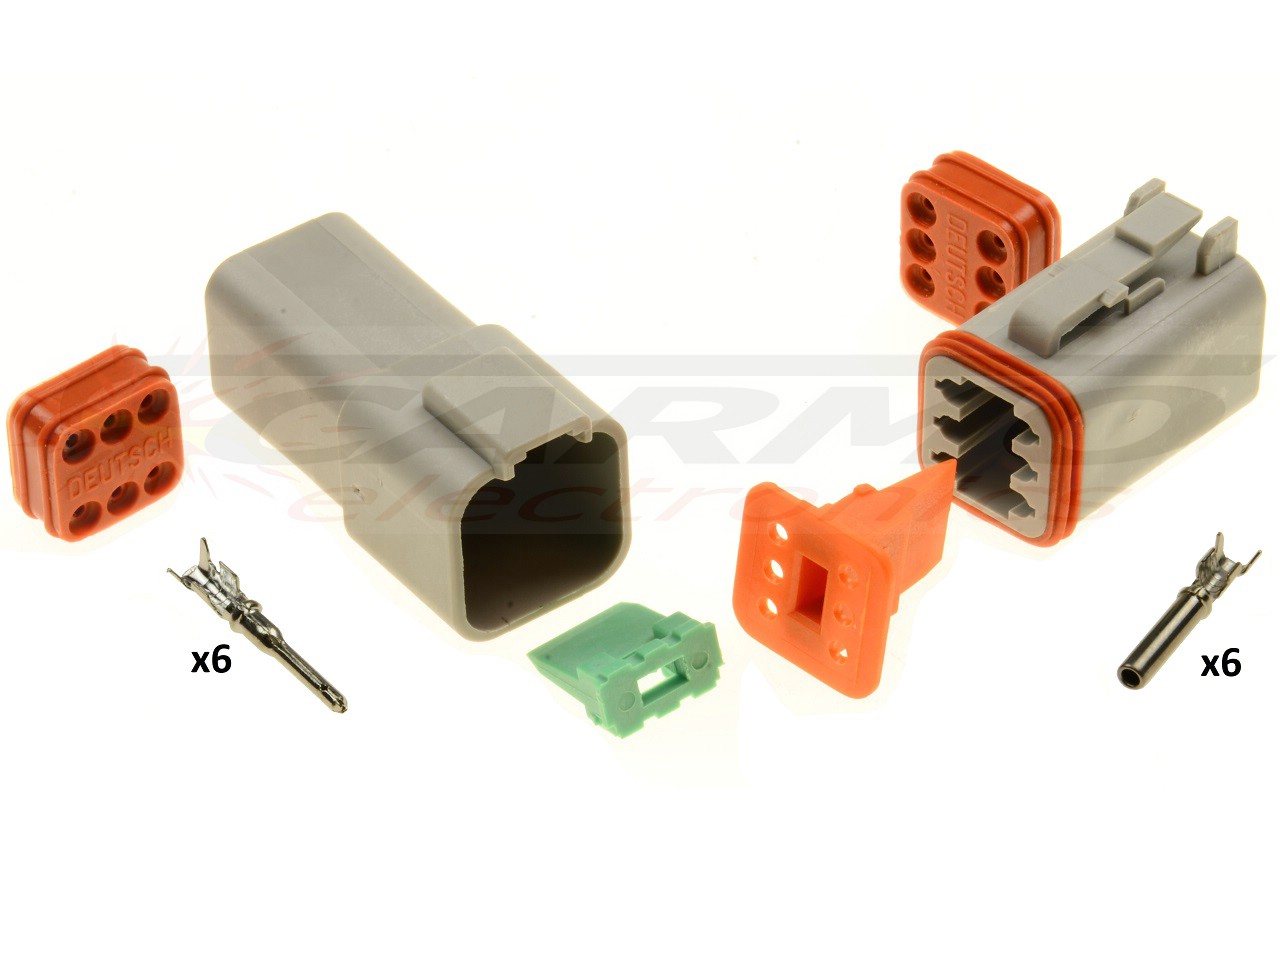 6 pole superseal connector Amphenol - Deutsch DT06-6S DT04-6P - Click Image to Close